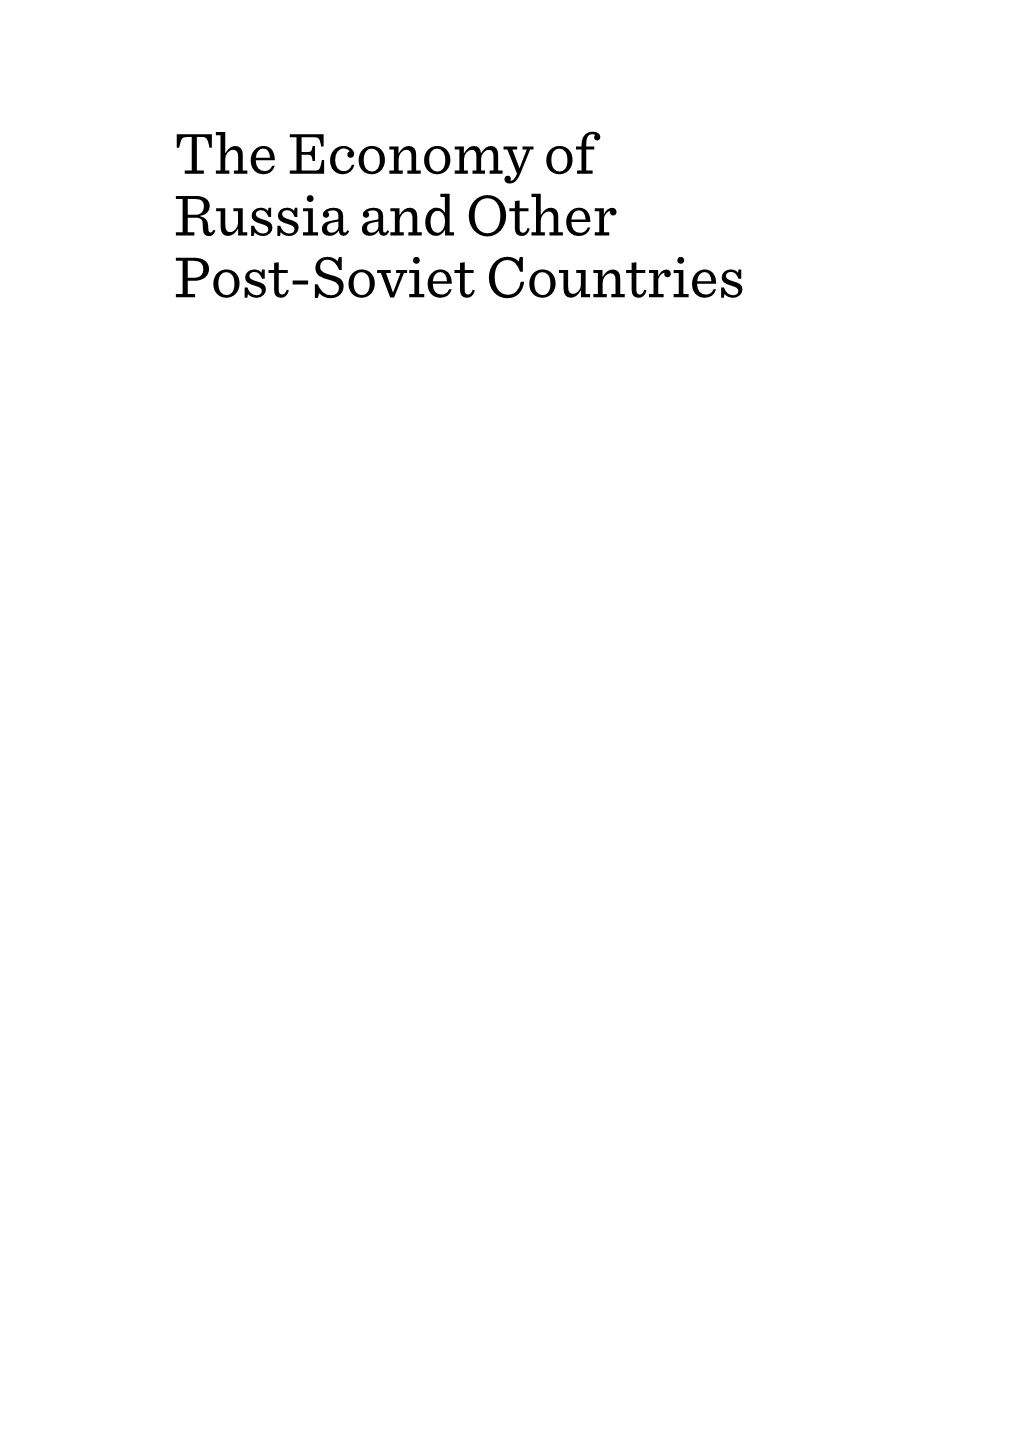 The Economy of Russia and Other Post-Soviet Countries